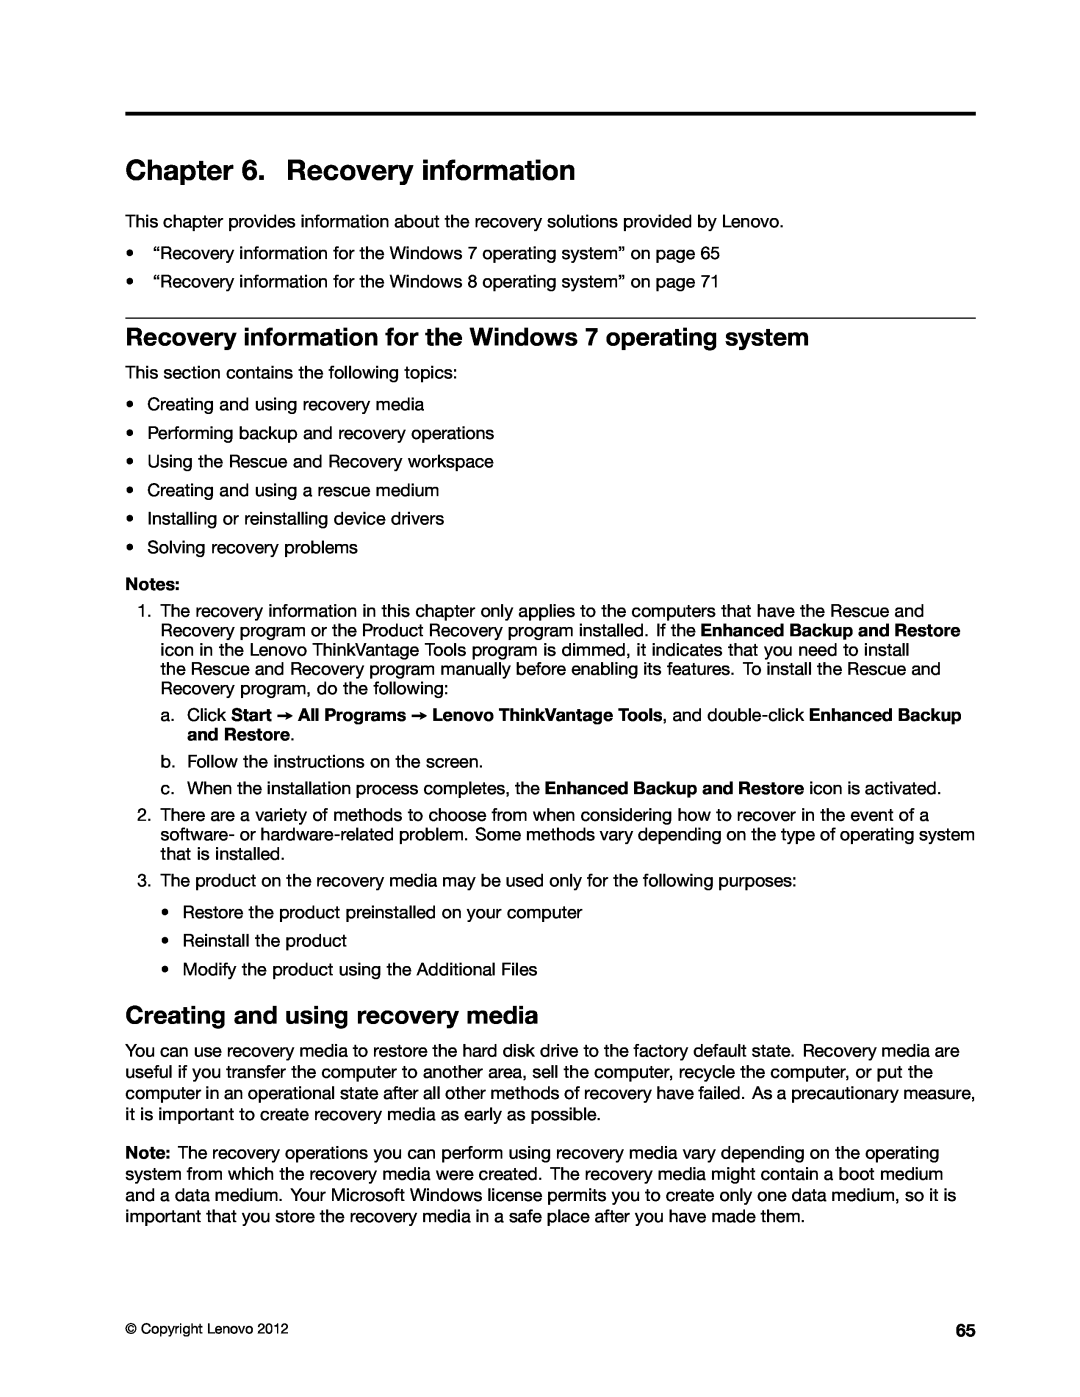 Lenovo 3484JMU manual Recovery information for the Windows 7 operating system, Creating and using recovery media 